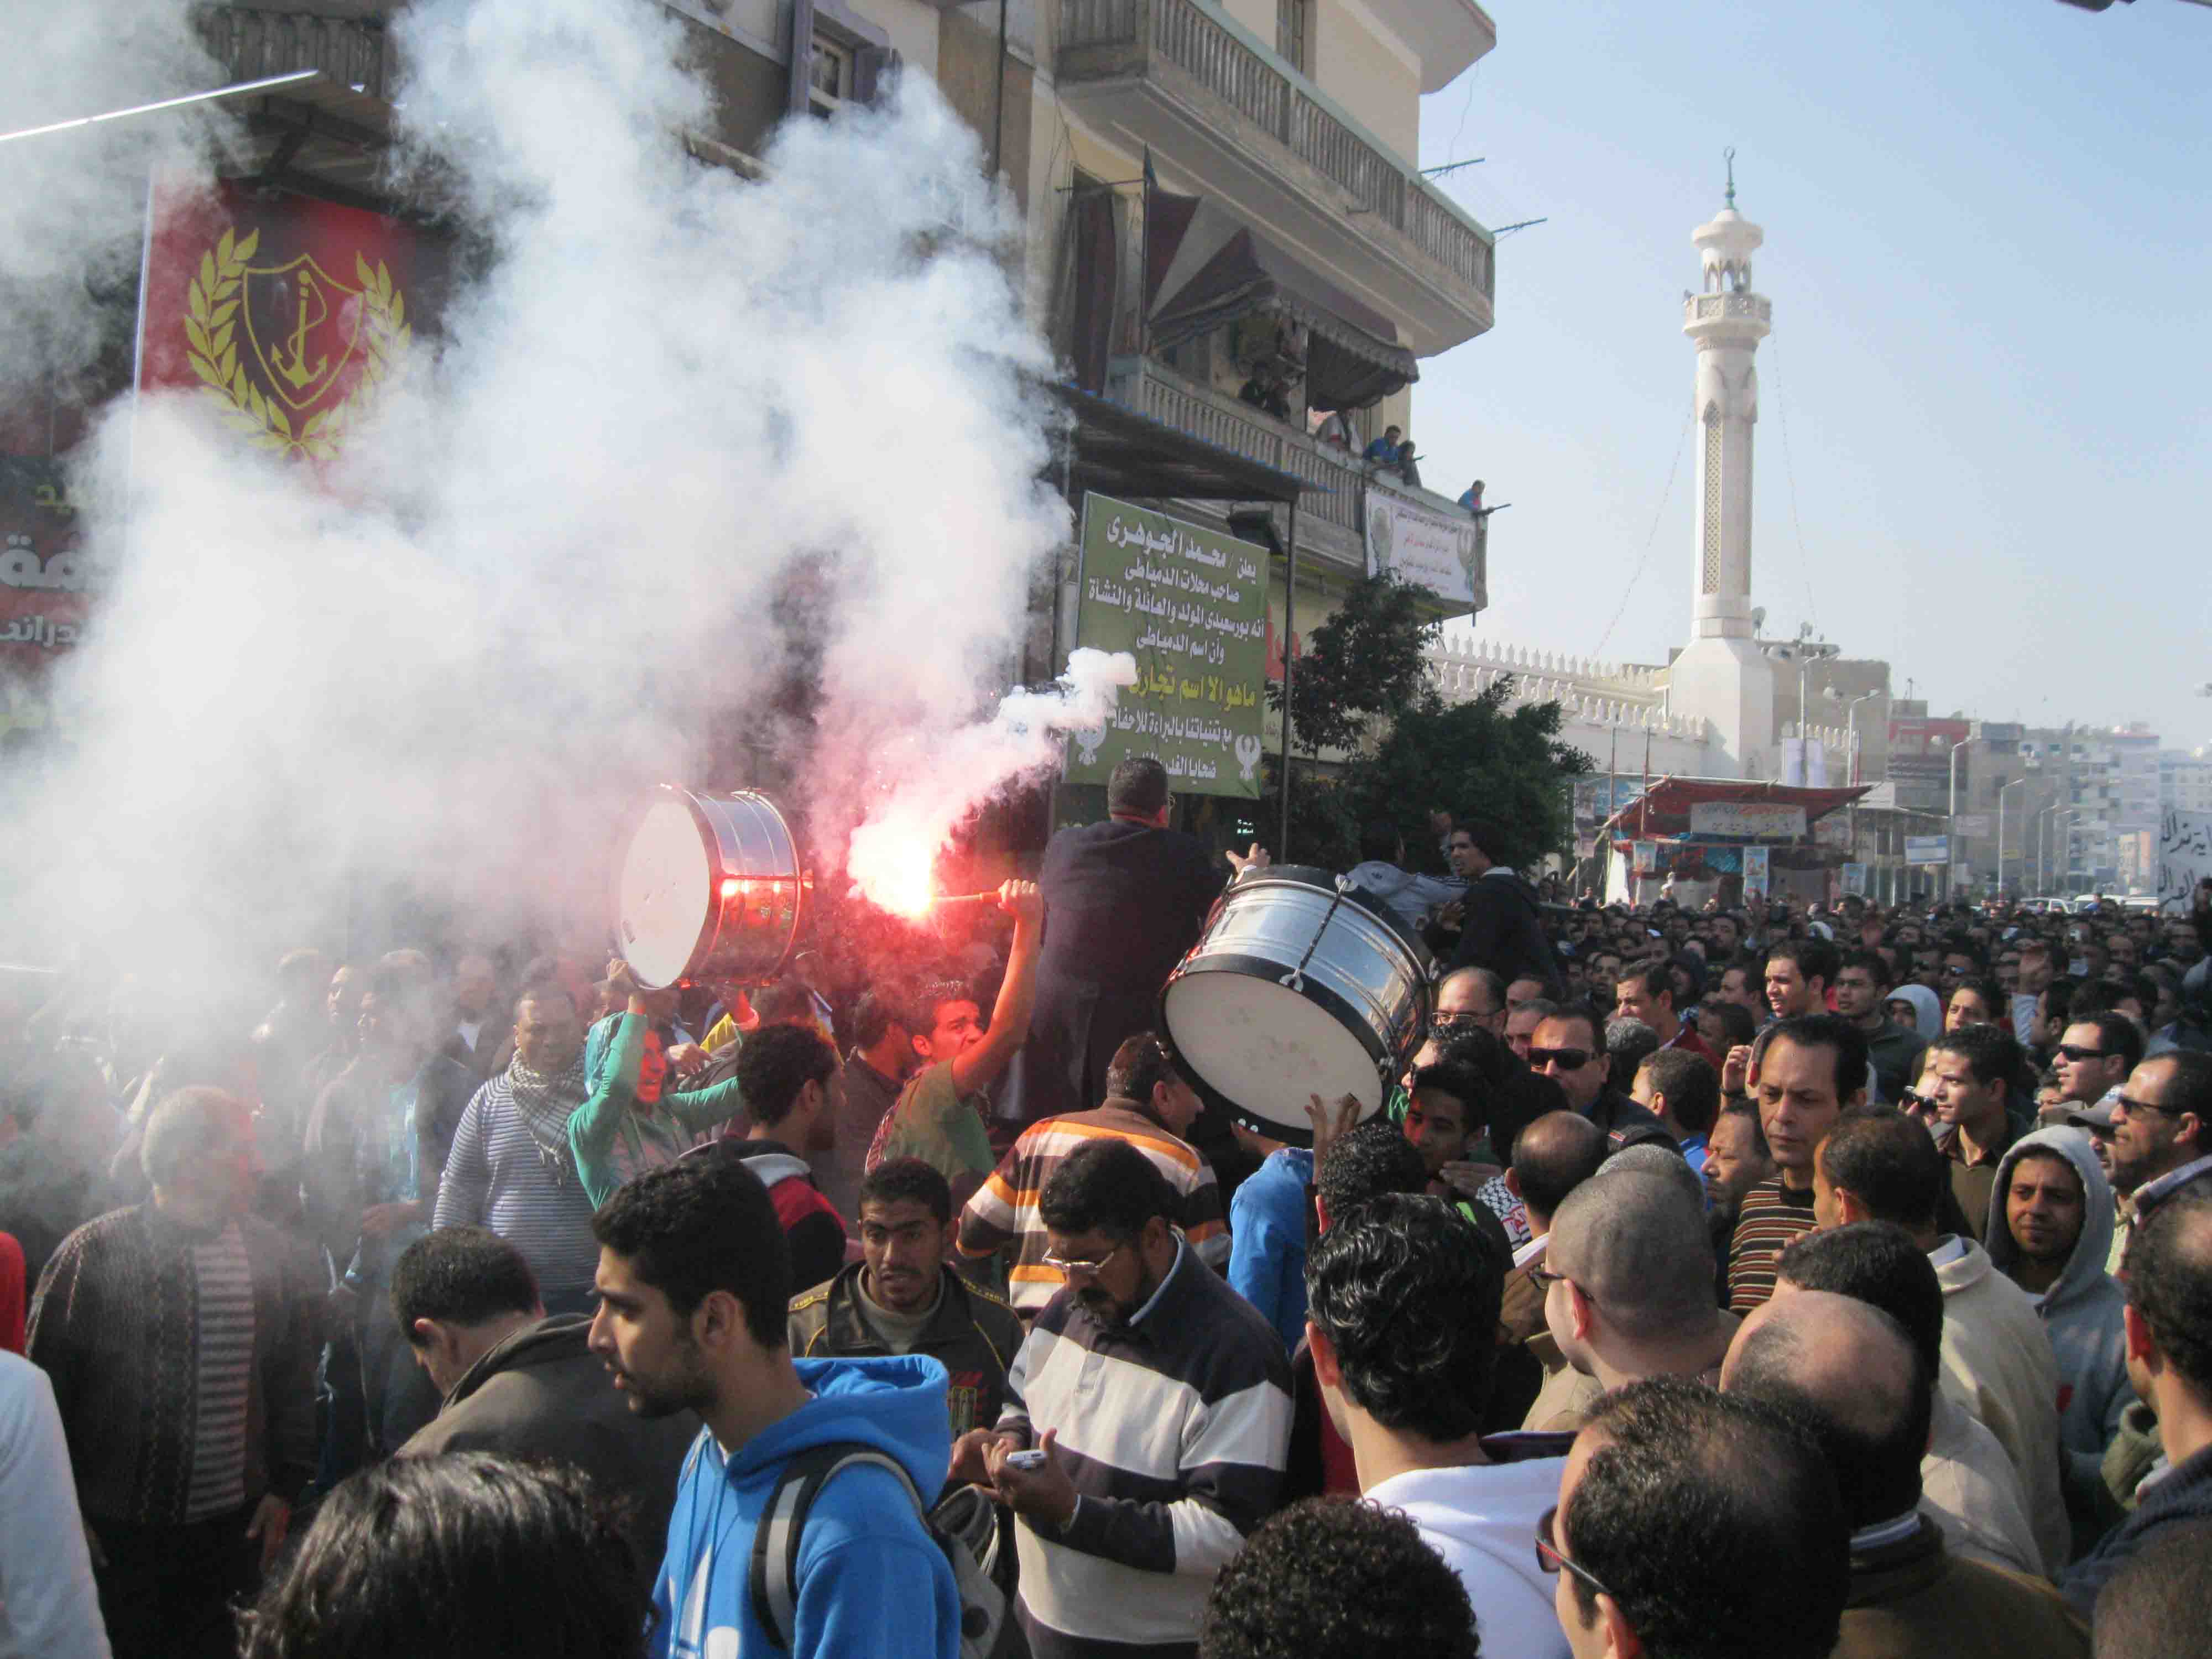 16 killed, 176 injured in Port Said clashes toll